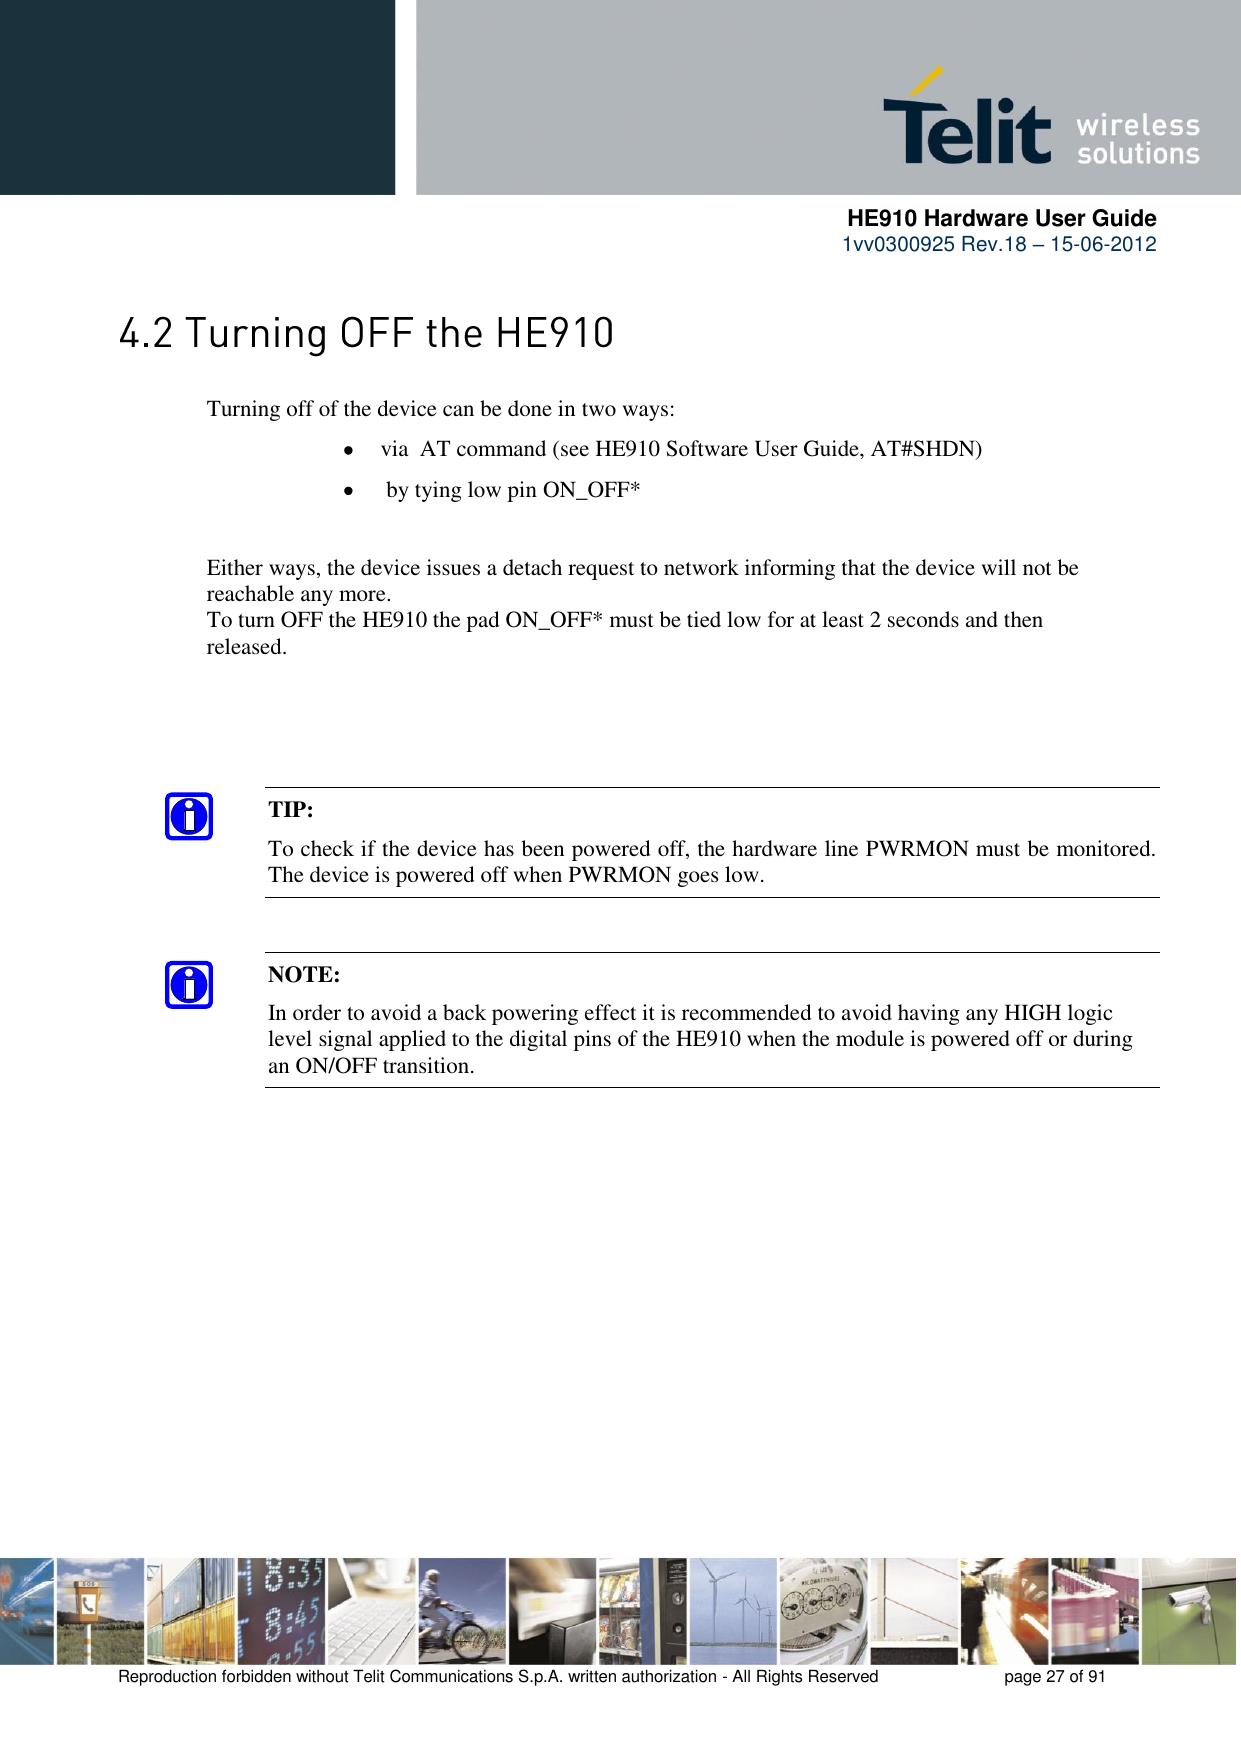      HE910 Hardware User Guide 1vv0300925 Rev.18 – 15-06-2012    Reproduction forbidden without Telit Communications S.p.A. written authorization - All Rights Reserved    page 27 of 91   Turning off of the device can be done in two ways:  via  AT command (see HE910 Software User Guide, AT#SHDN)   by tying low pin ON_OFF*    Either ways, the device issues a detach request to network informing that the device will not be   reachable any more.    To turn OFF the HE910 the pad ON_OFF* must be tied low for at least 2 seconds and then   released.  TIP:  To check if the device has been powered off, the hardware line PWRMON must be monitored. The device is powered off when PWRMON goes low. NOTE: In order to avoid a back powering effect it is recommended to avoid having any HIGH logic level signal applied to the digital pins of the HE910 when the module is powered off or during an ON/OFF transition. 